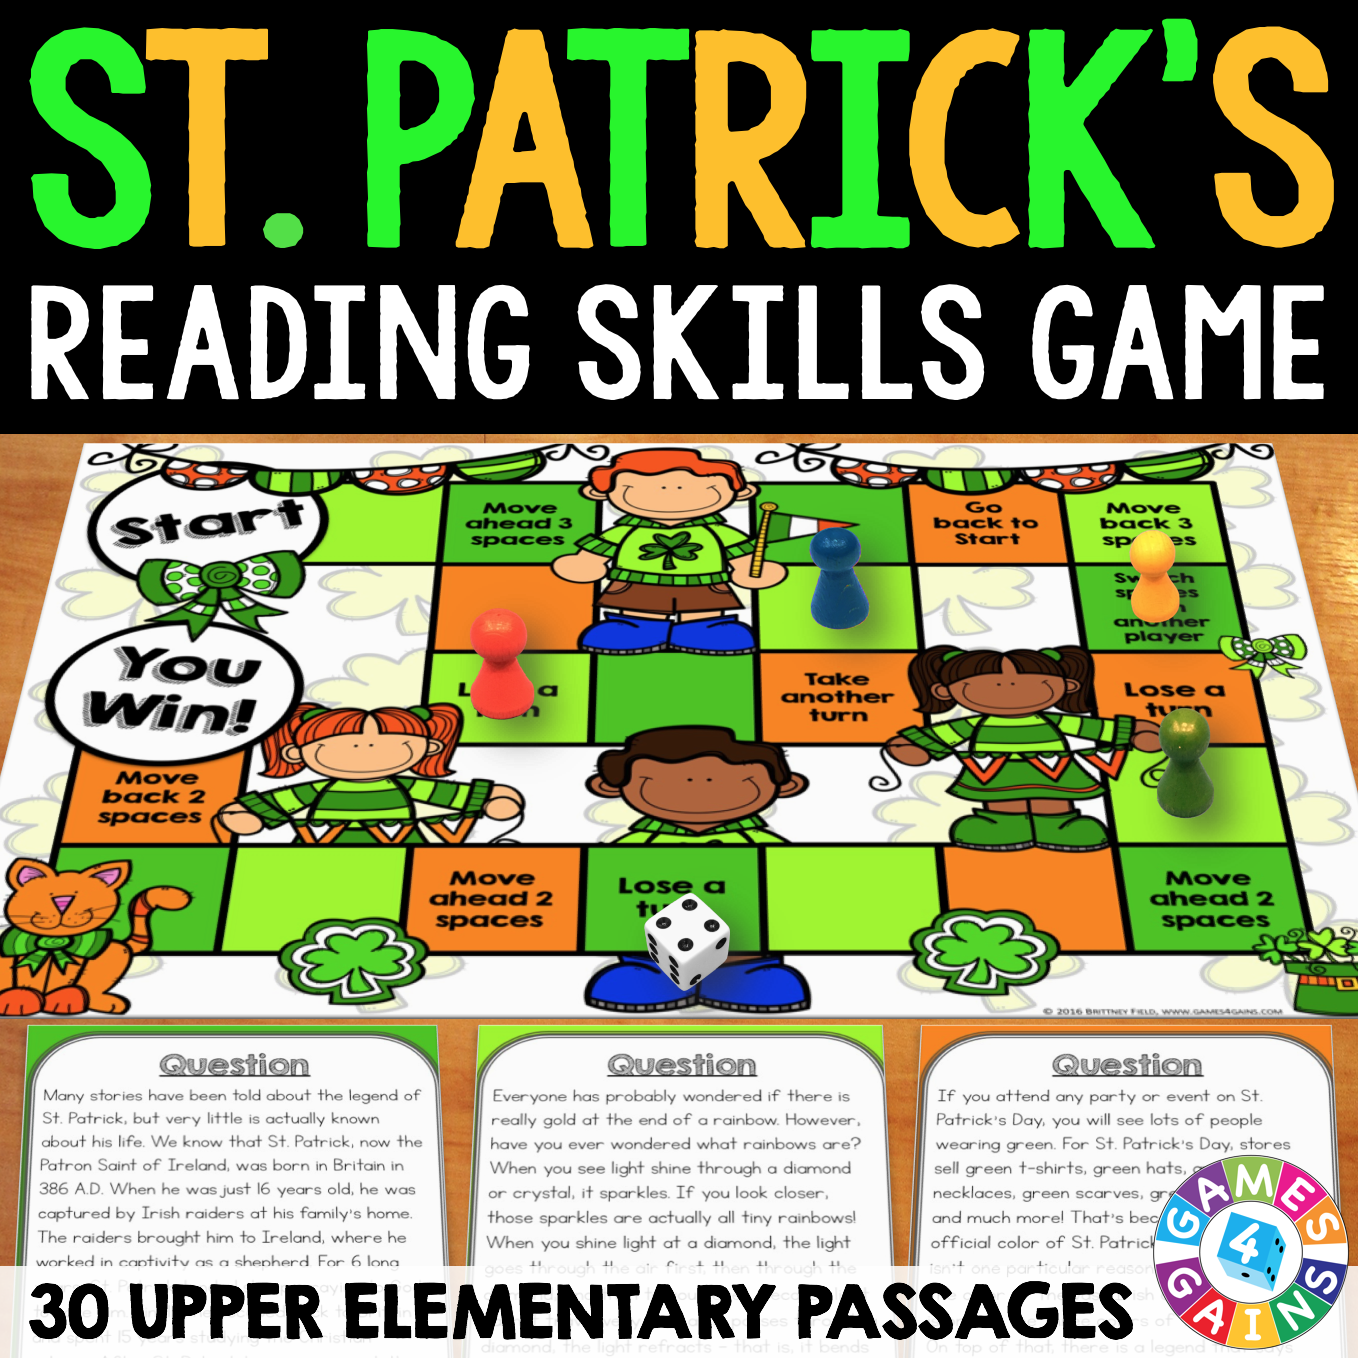 St. Patrick's Day Reading Game Cover.png